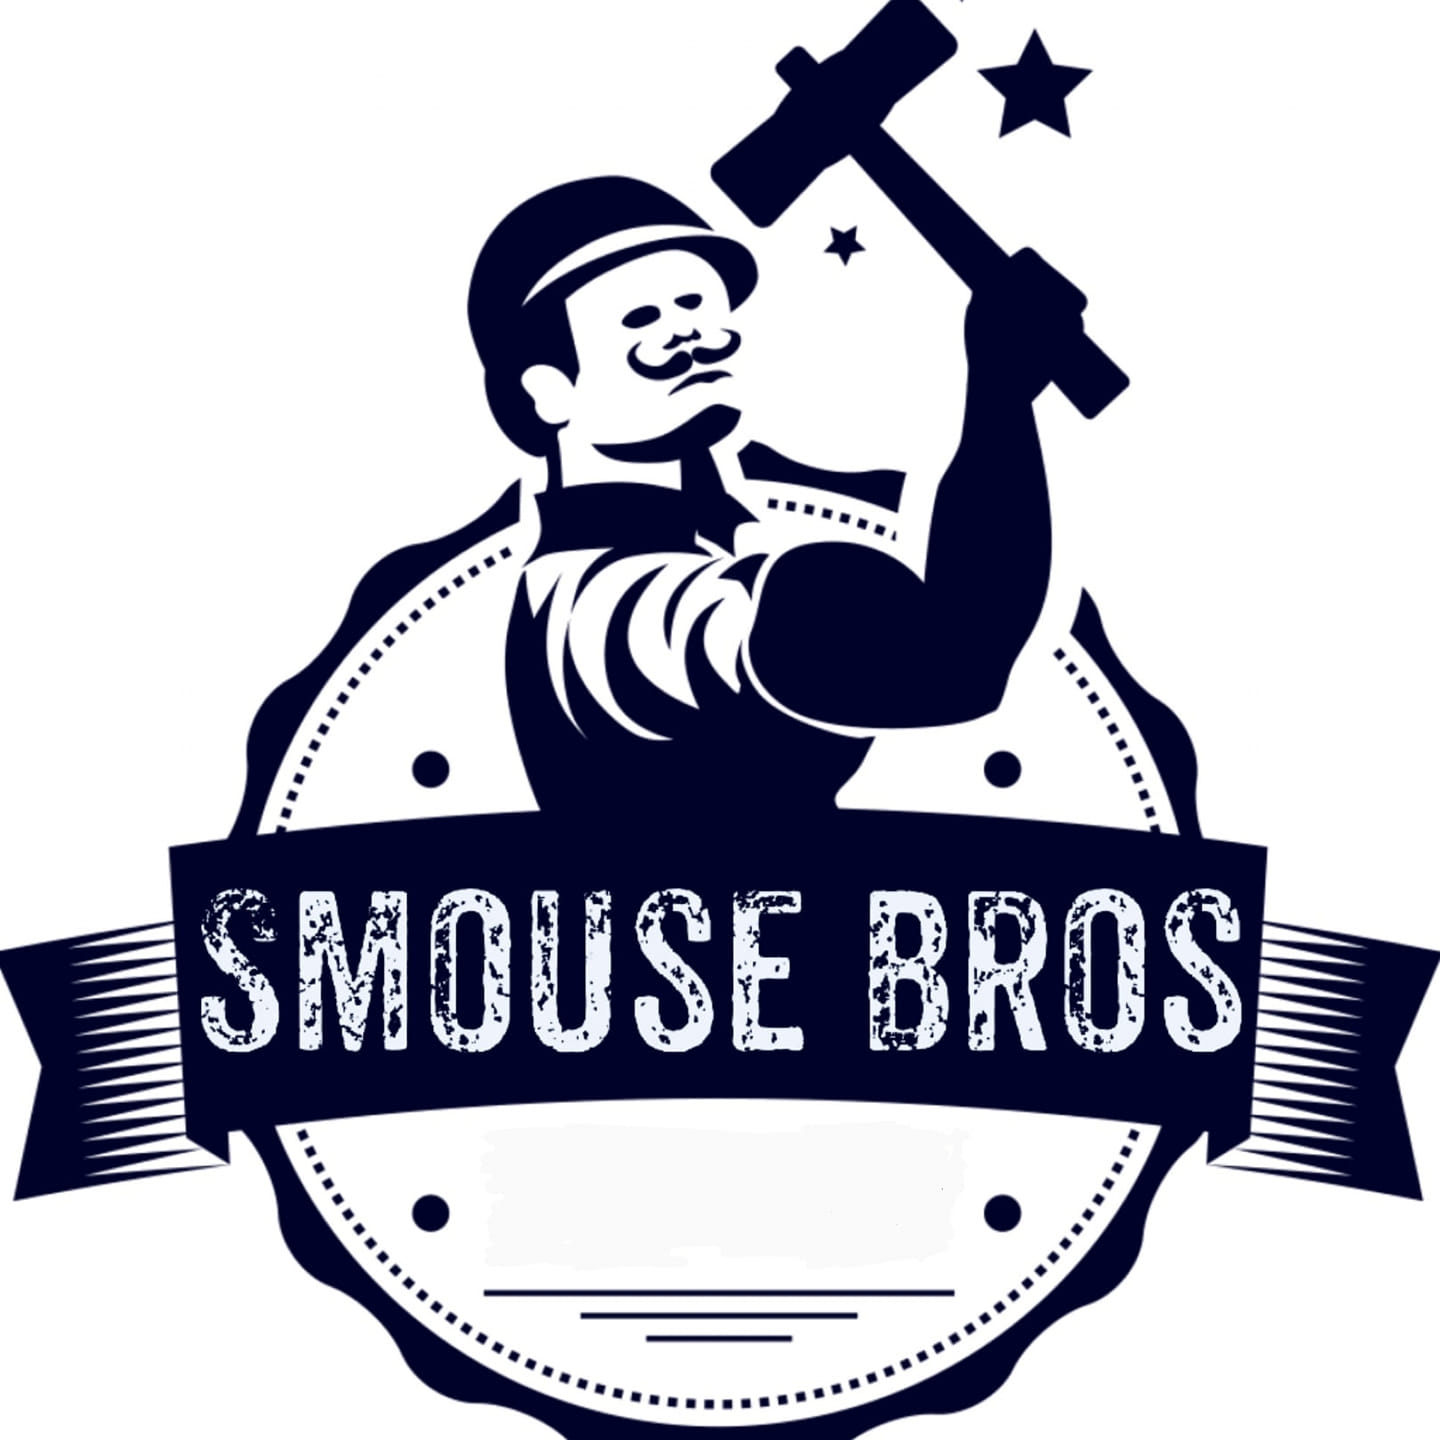 Smouse Brothers